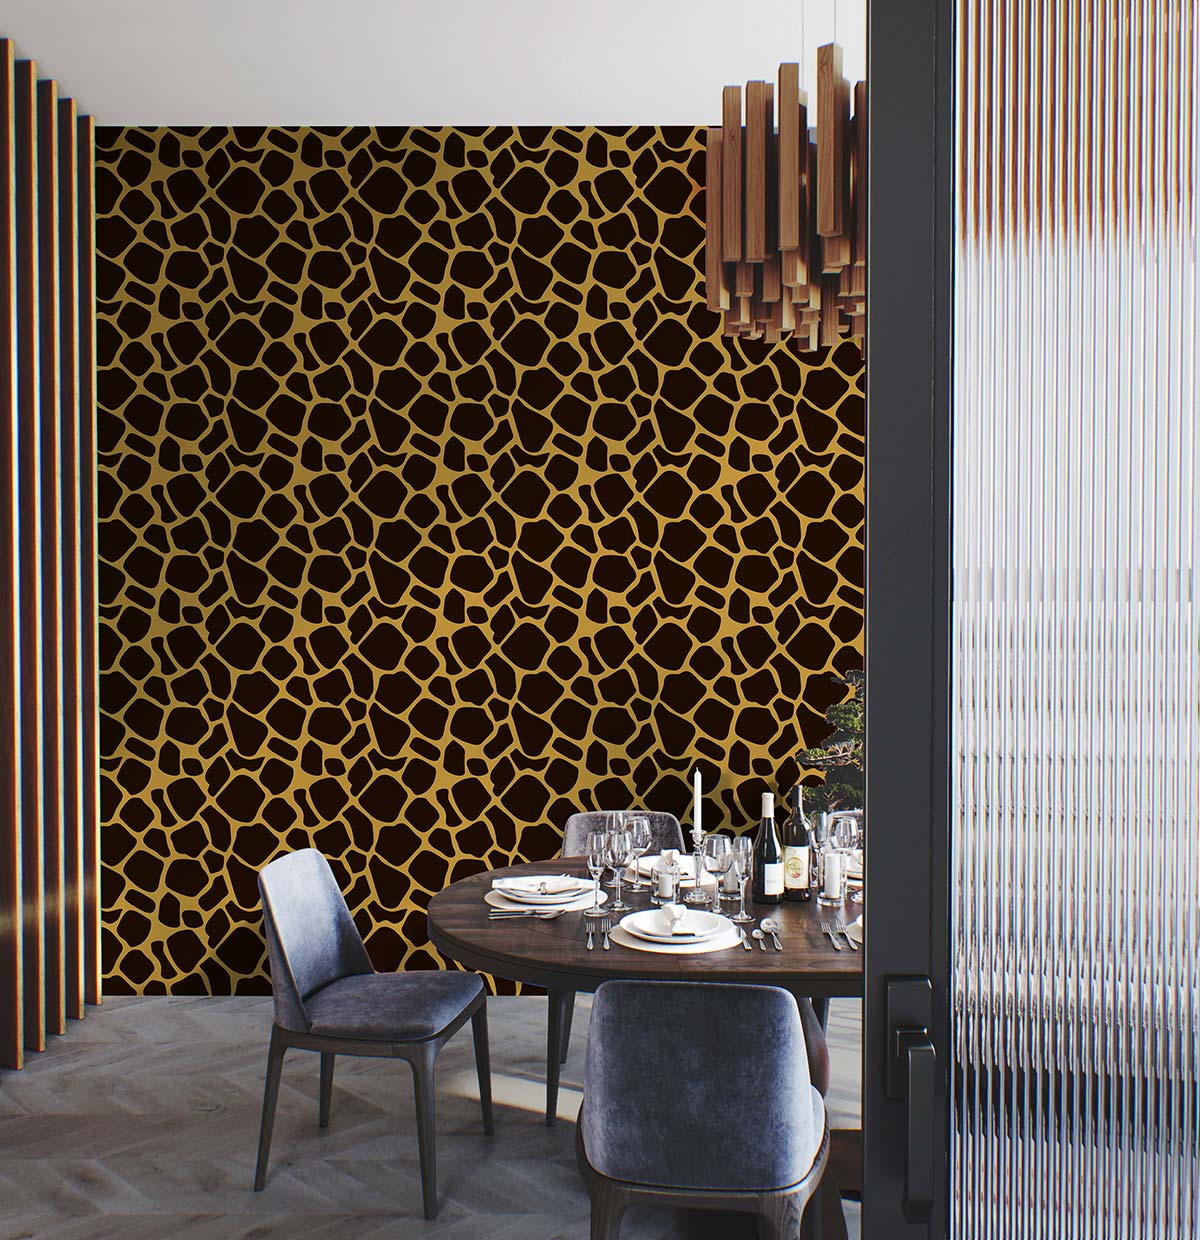 wallpaper mural with a rich leopard print that may be used for decorating the dining area.